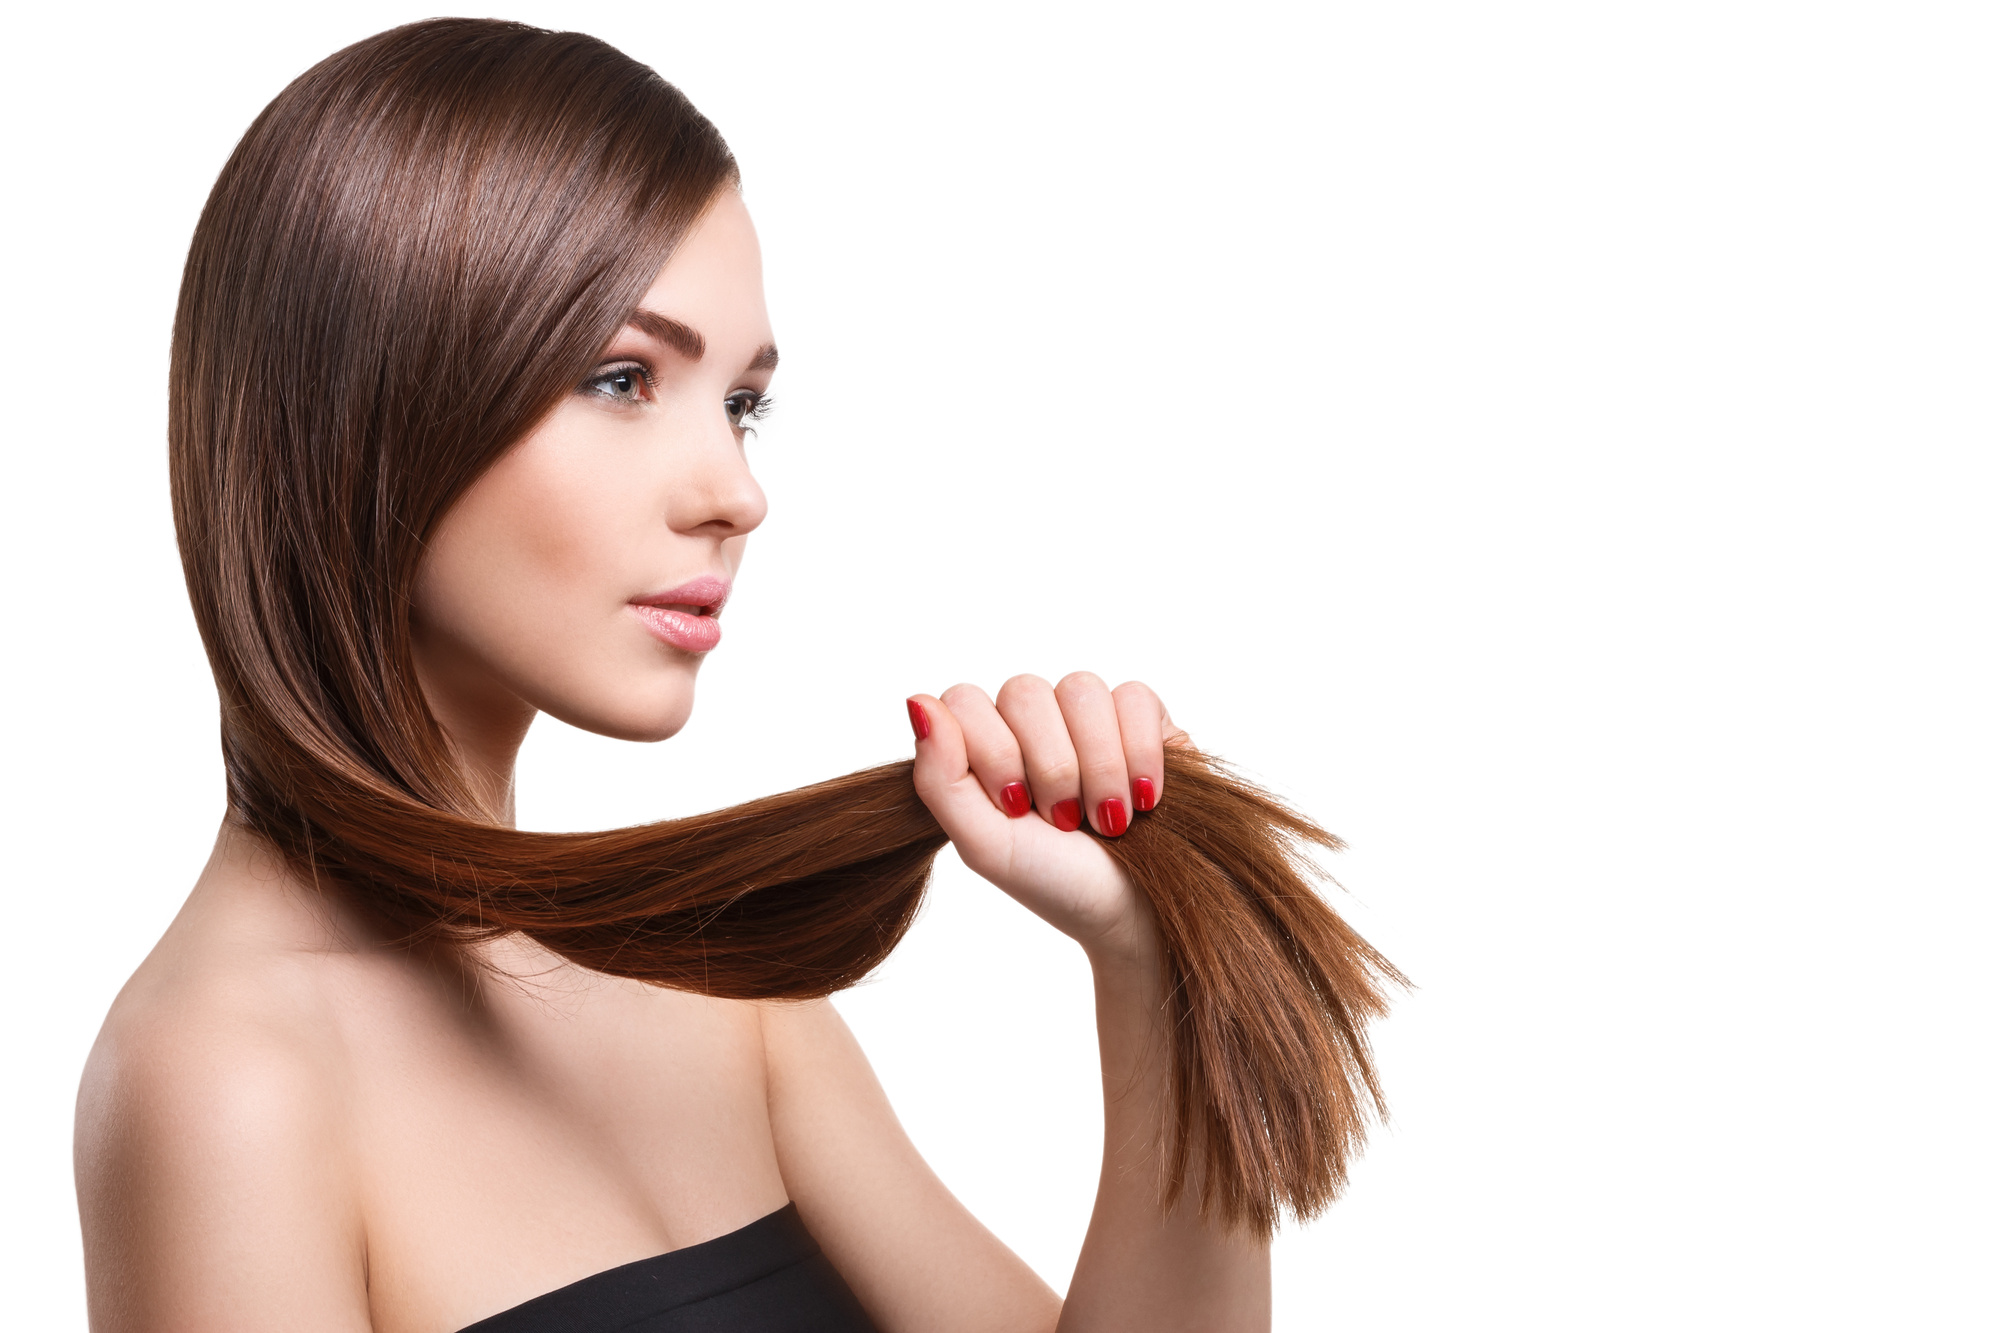 How to Take Care of Long Hair: 14 Tips You Need to Know